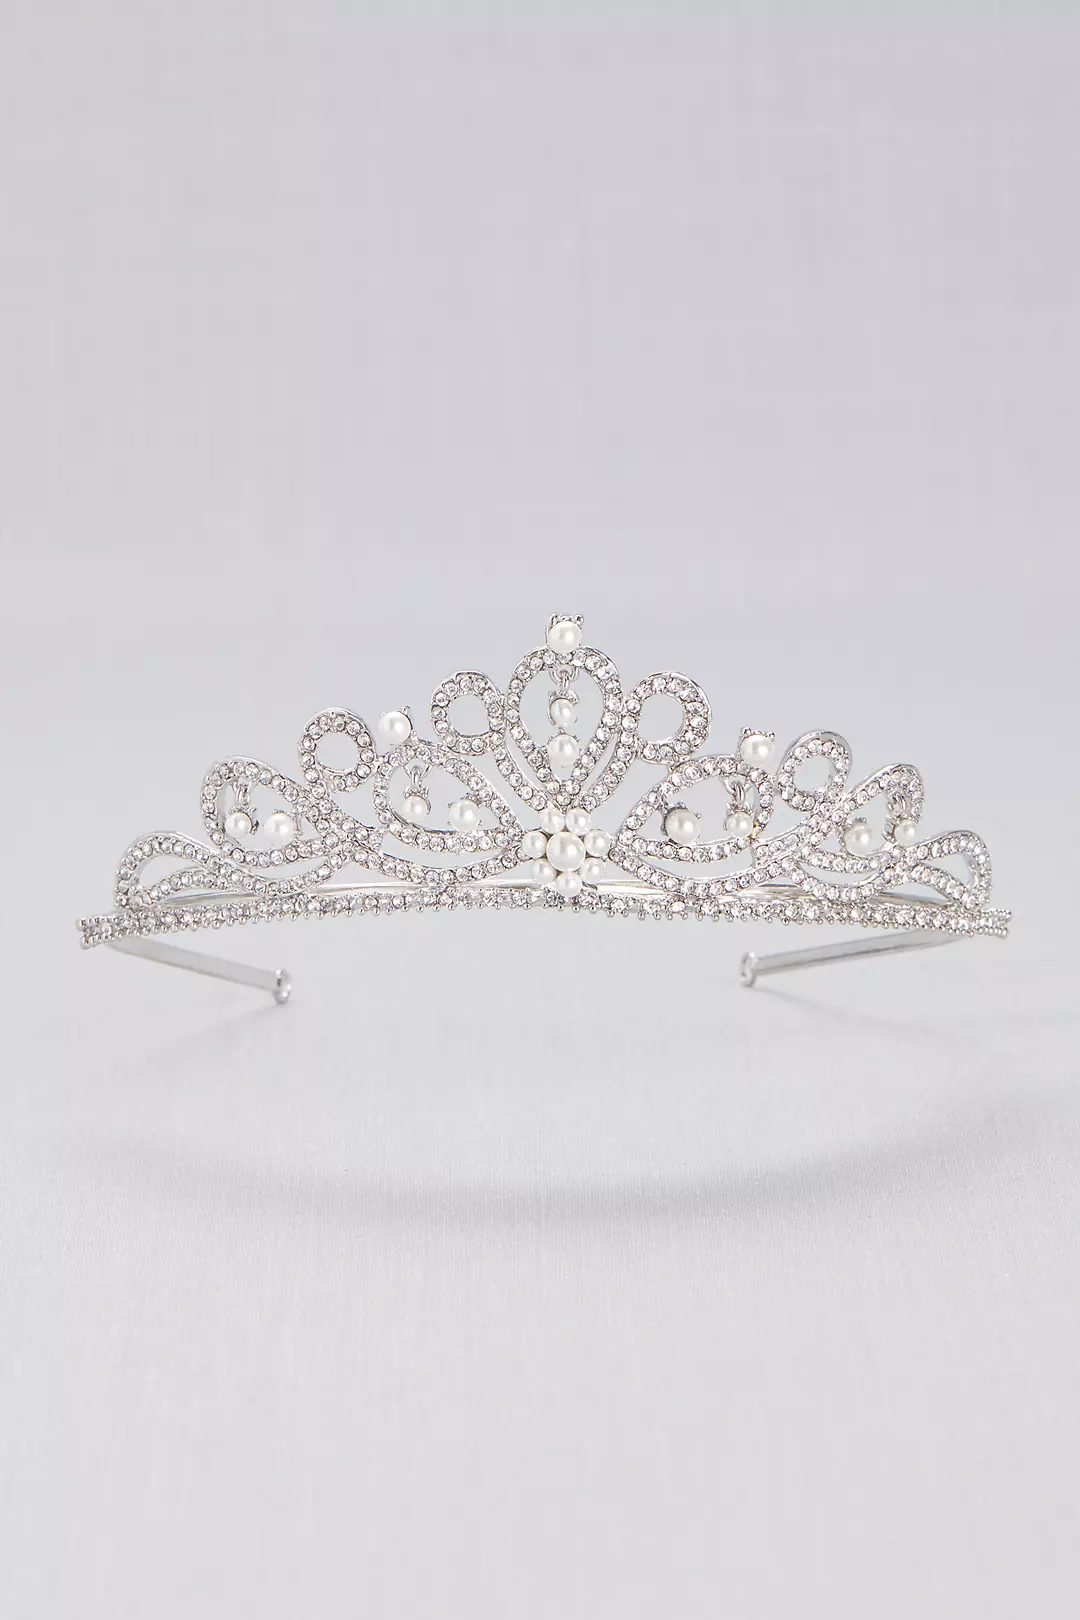 Scrolling Pave Crystal and Pearl Tiara Image